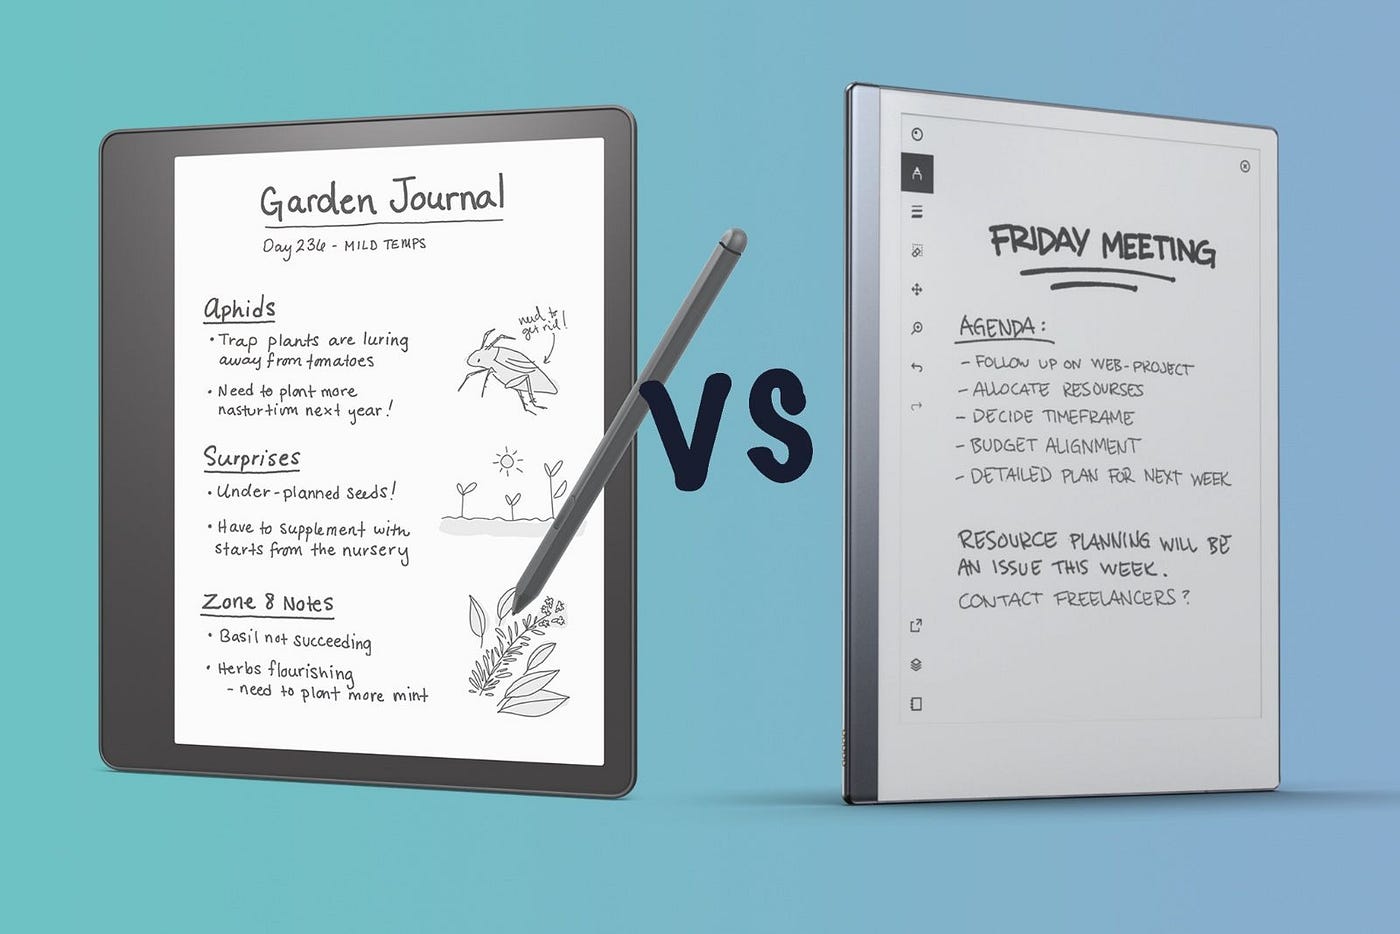 Kindle Scribe: Here comes the first Kindle you can write and sketch  on